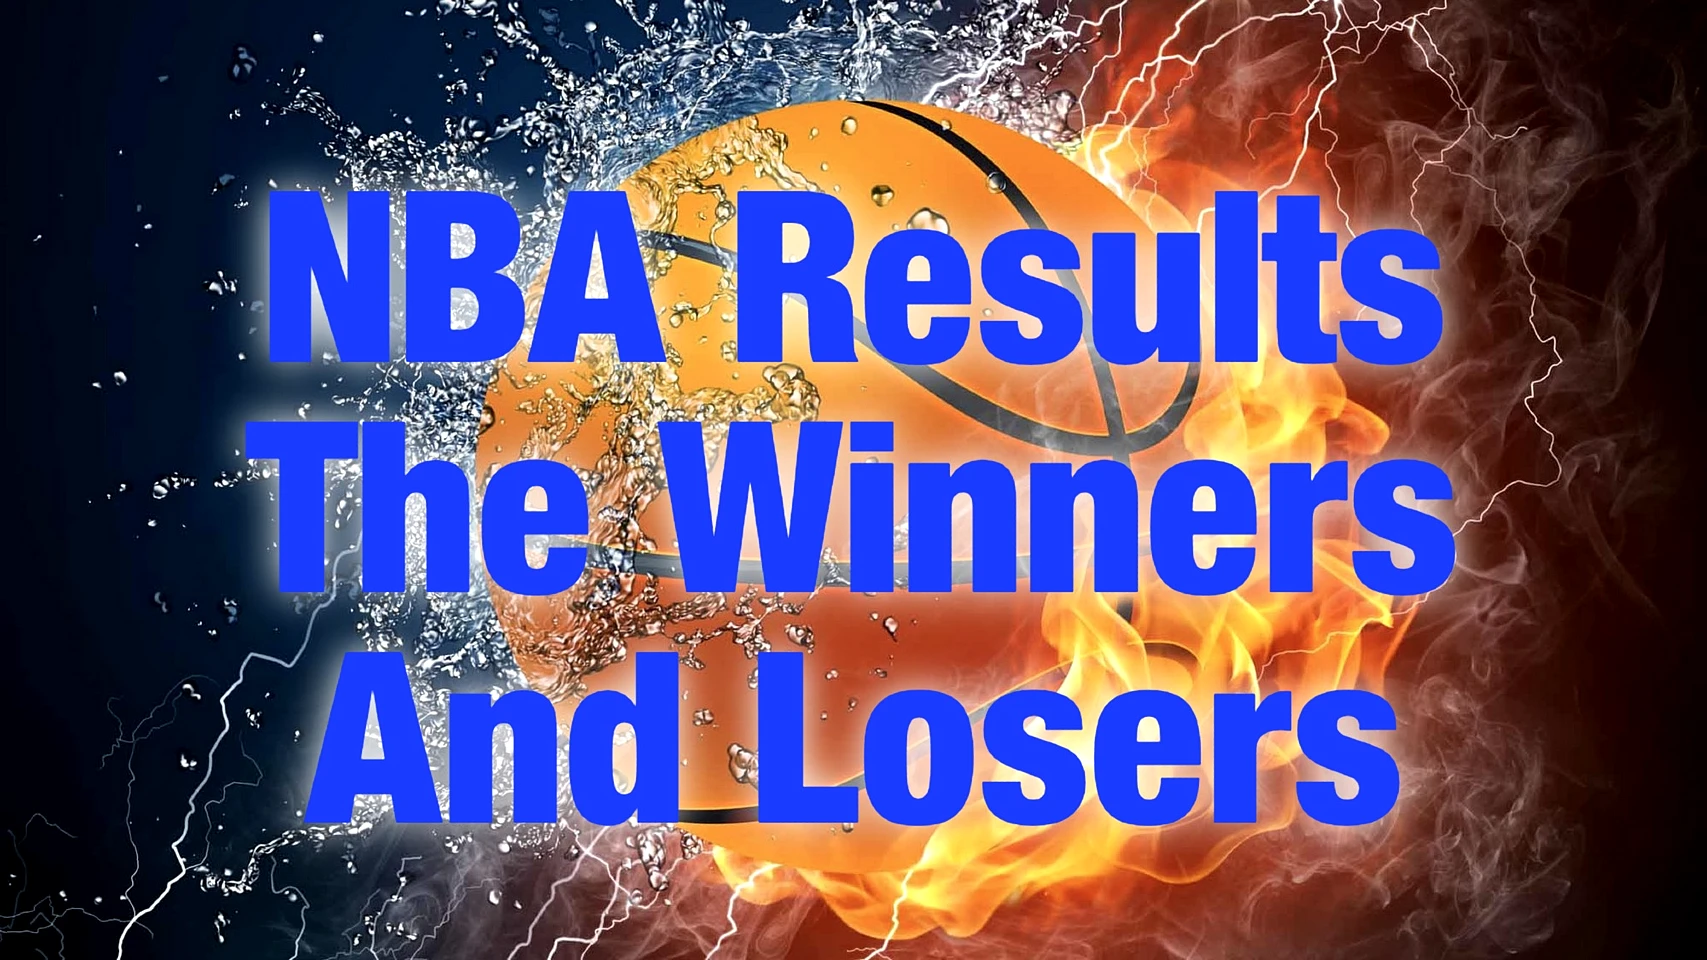 NBA scores and results last night who were the winners and losers?